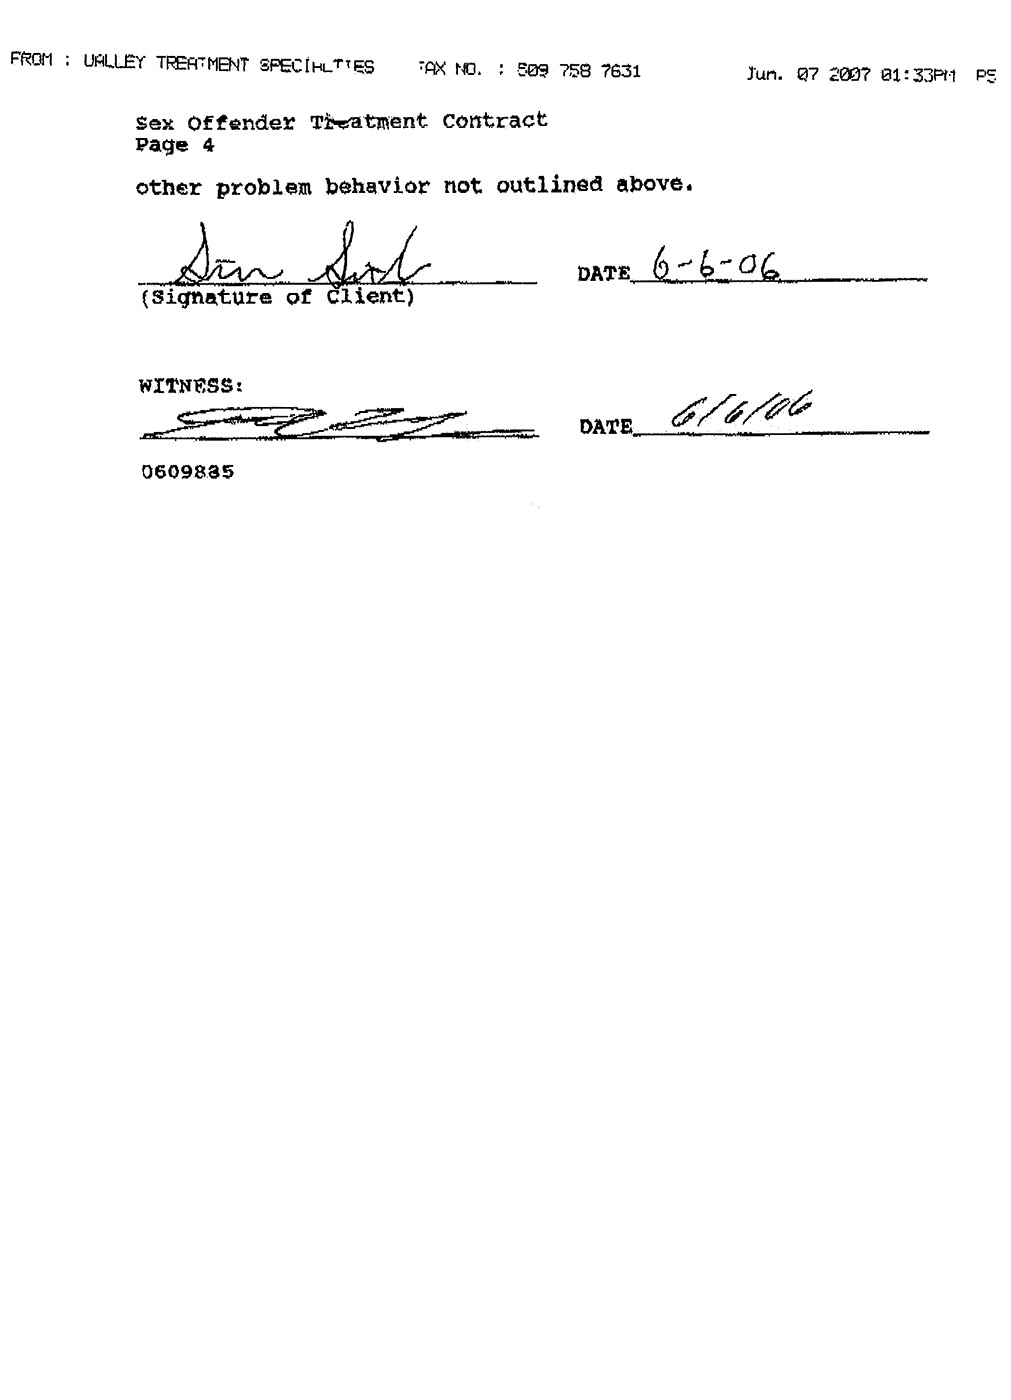 Valley Treatment Specialties Treatment Contract, page 4